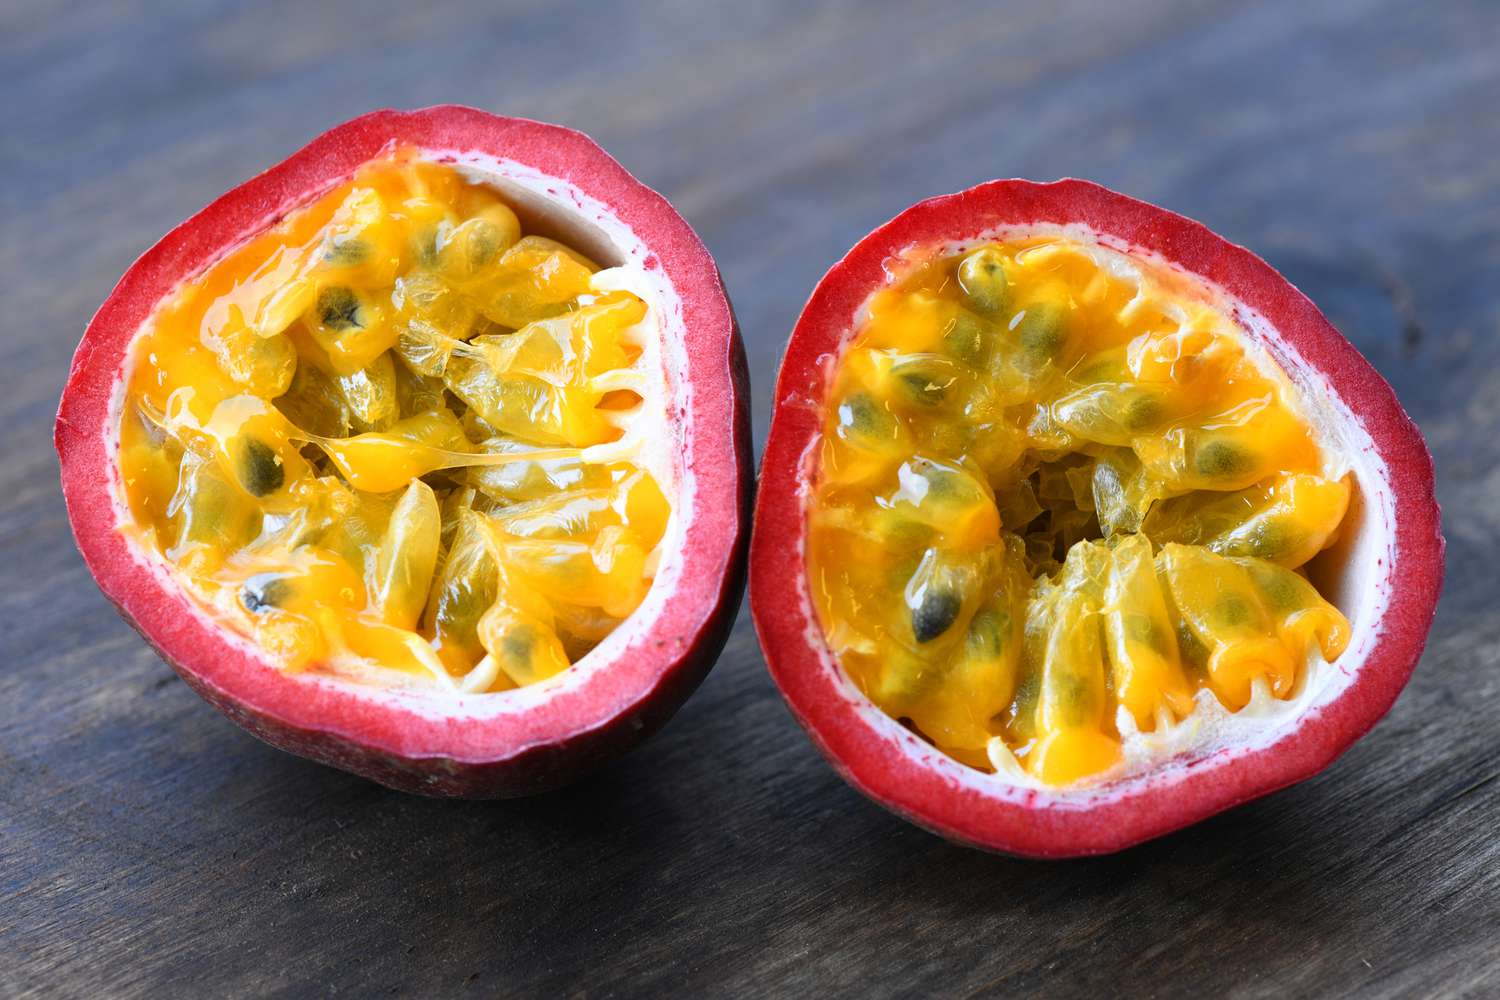 29 interesting facts about Passion fruit